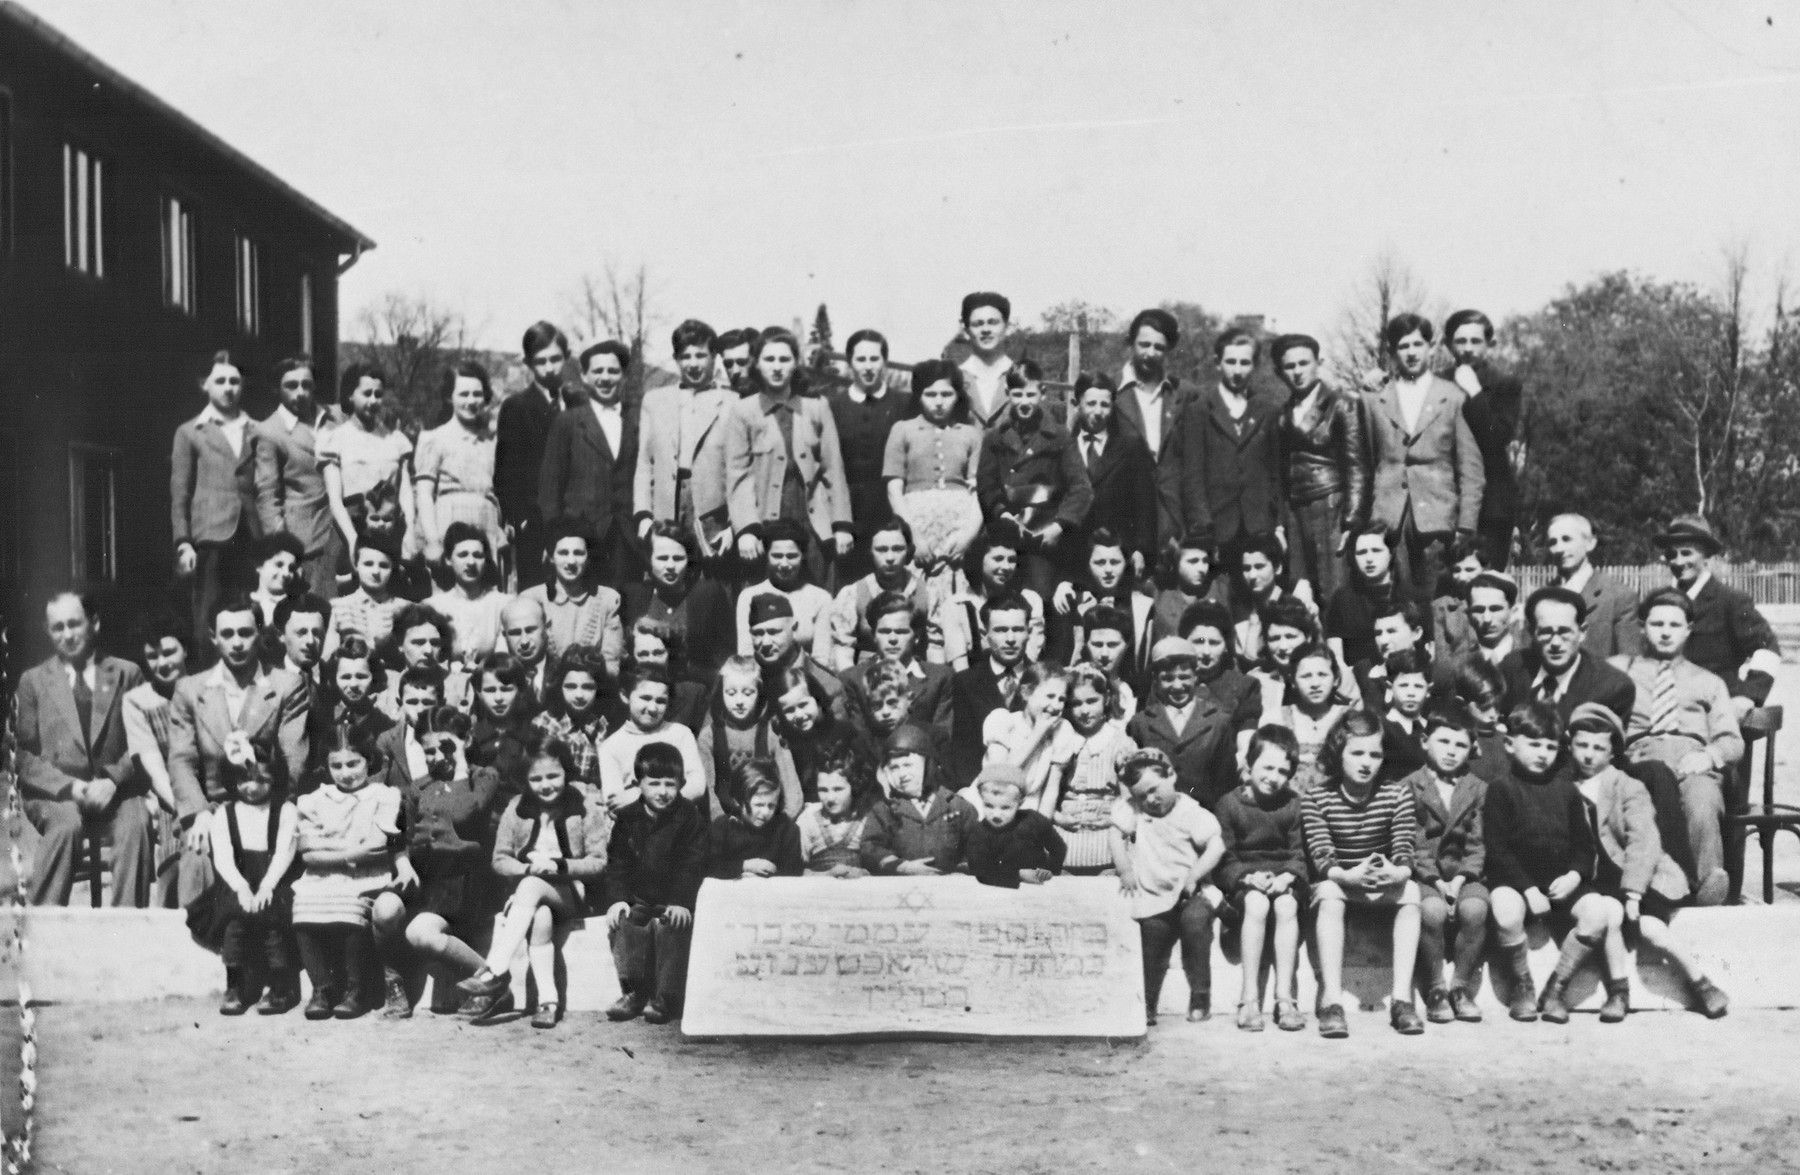 Group portrait of the students and teachers of the Hebrew primary school in the Schlachtensee displaced persons camp.  

Among those pictured is Harold Fishbein (third row from the front, center wearing the soft military cap) and Regina Laks (fourth row center).